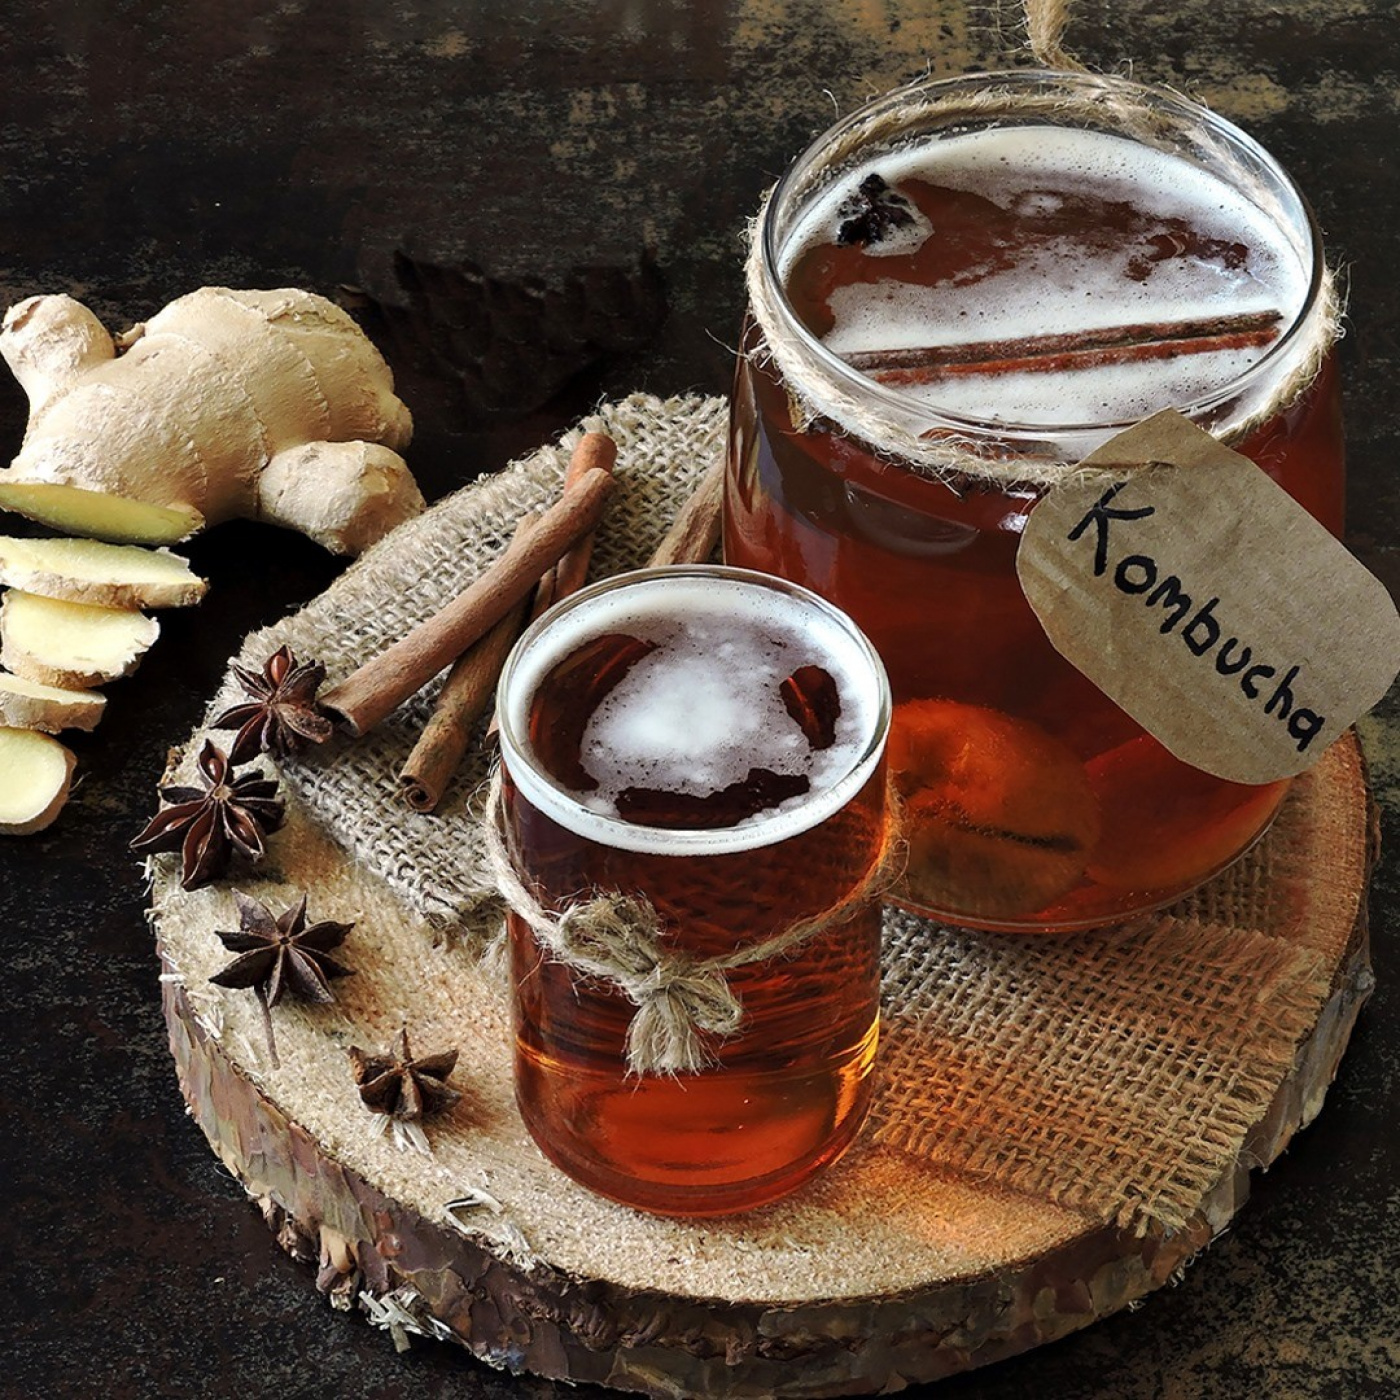 Get started with kombucha